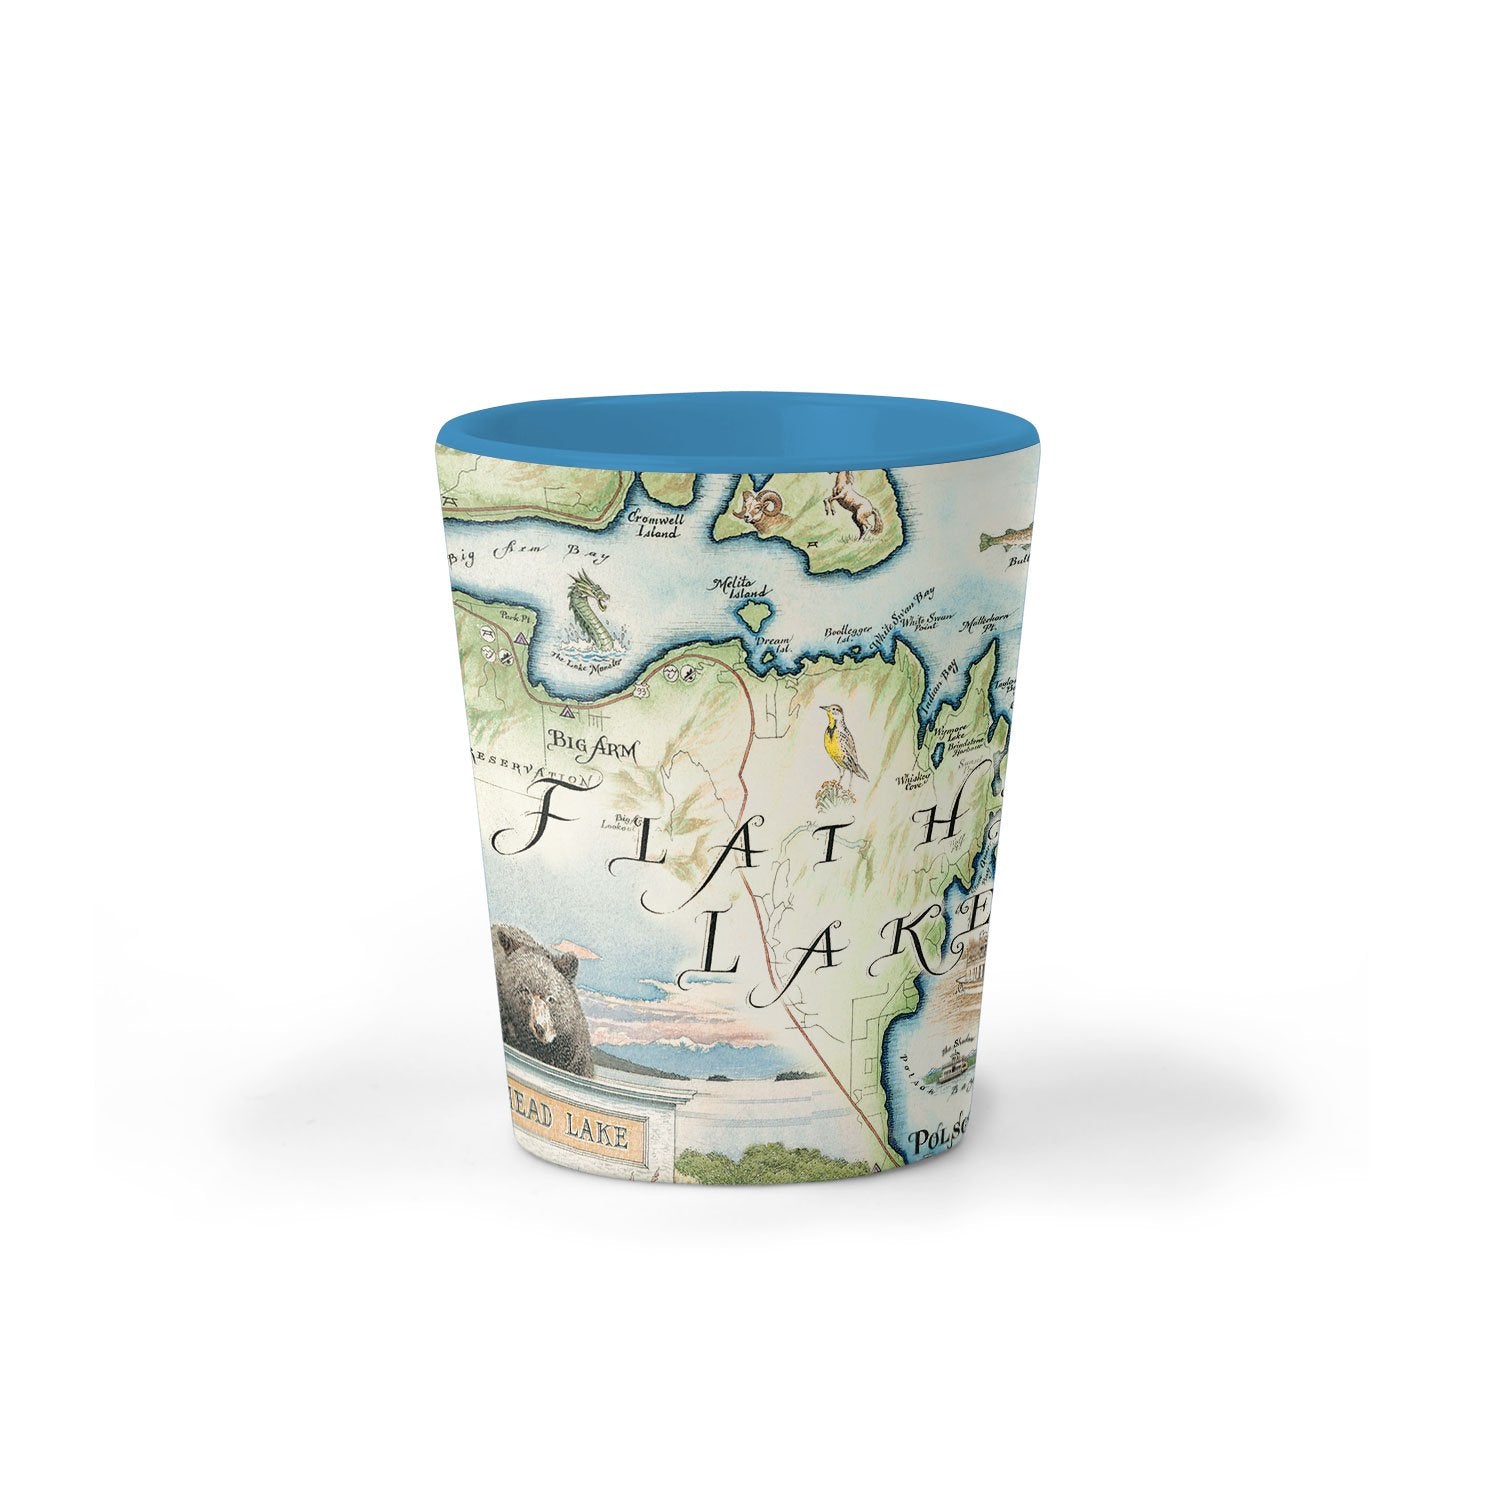 Montana's Flathead Lake Map Ceramic shot glass by Xplorer Maps. Features Golfing, Steamboat, Rafting, birds, eagles, Osprey, Bears, forest, water, deer, mountain lion, fish, Cherry Blossoms, and flowers like Glacier Lilies and Lady Slippers. Cities and landmarks are noted such as Woods Bay, Wild Horse Island, Finley Point, and Big Arm. 